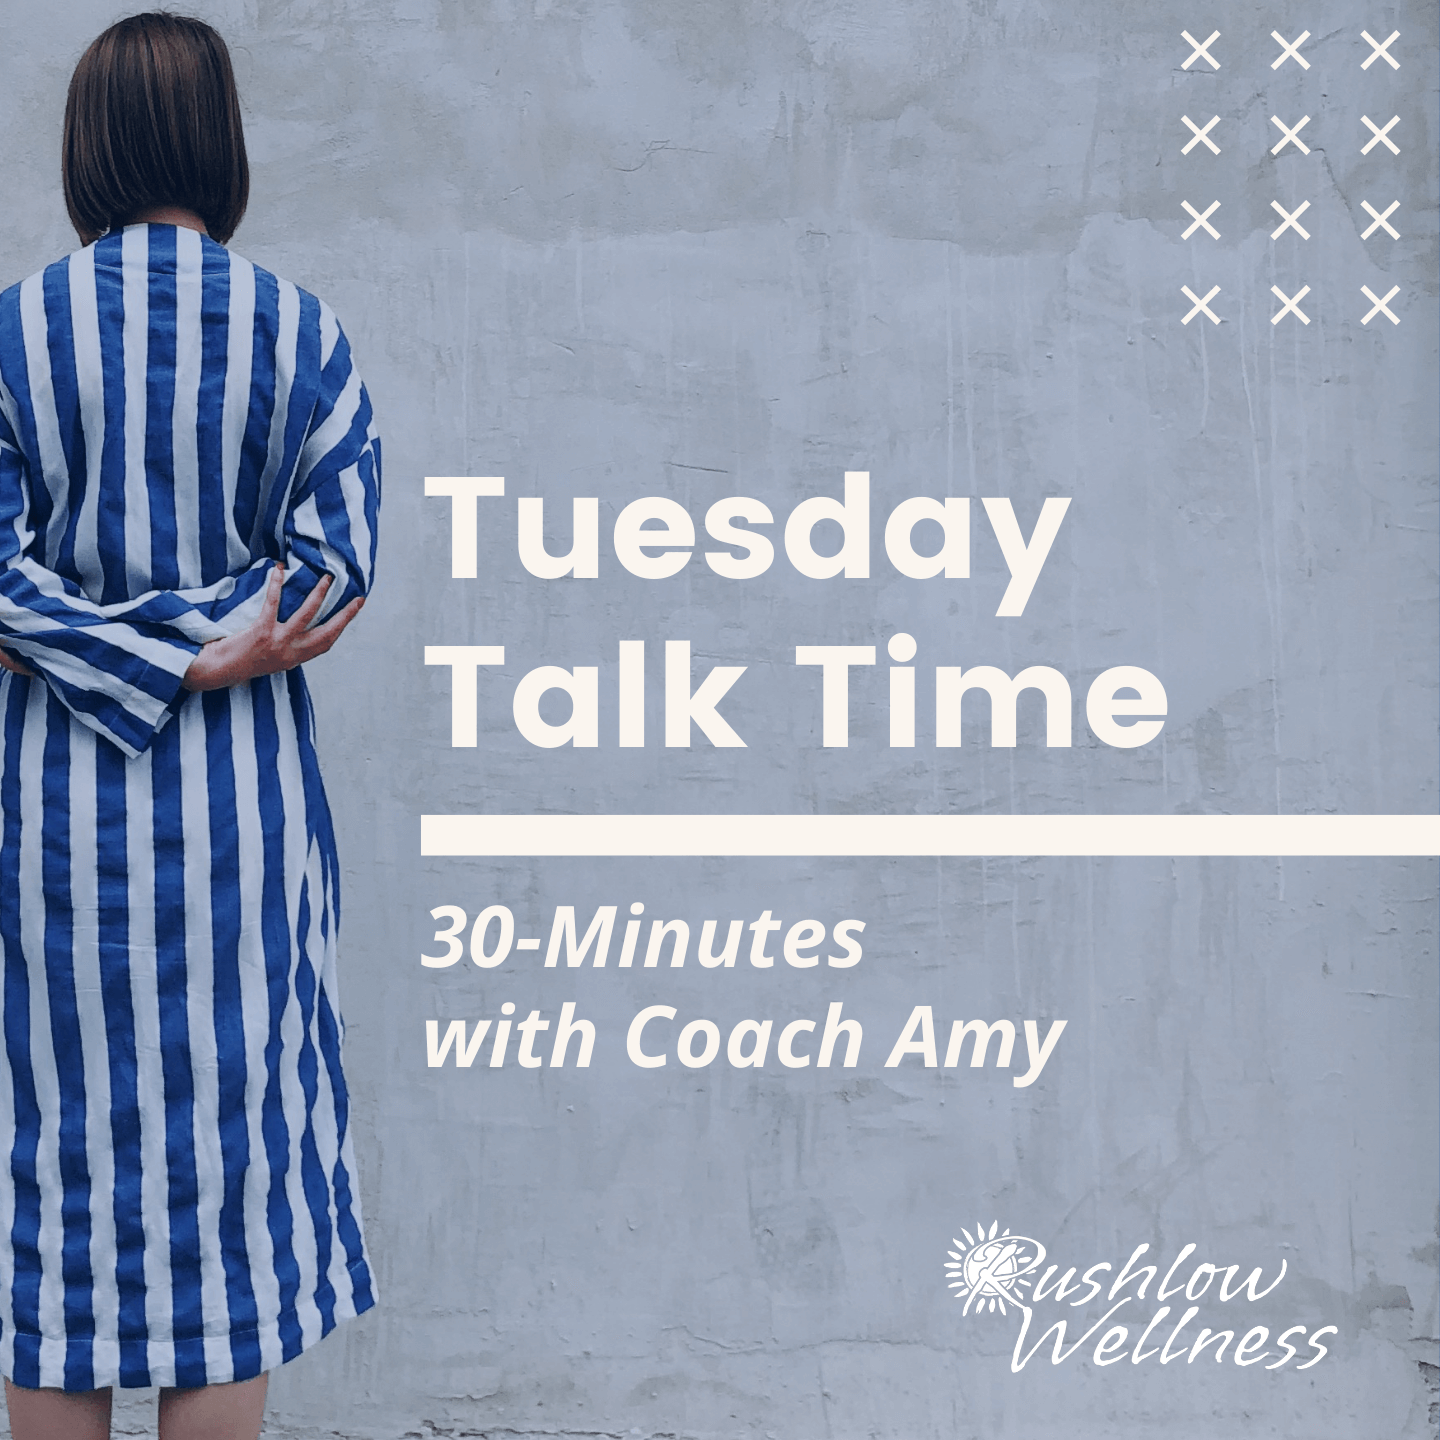 Tuesday Talk Time: 30-Minutes